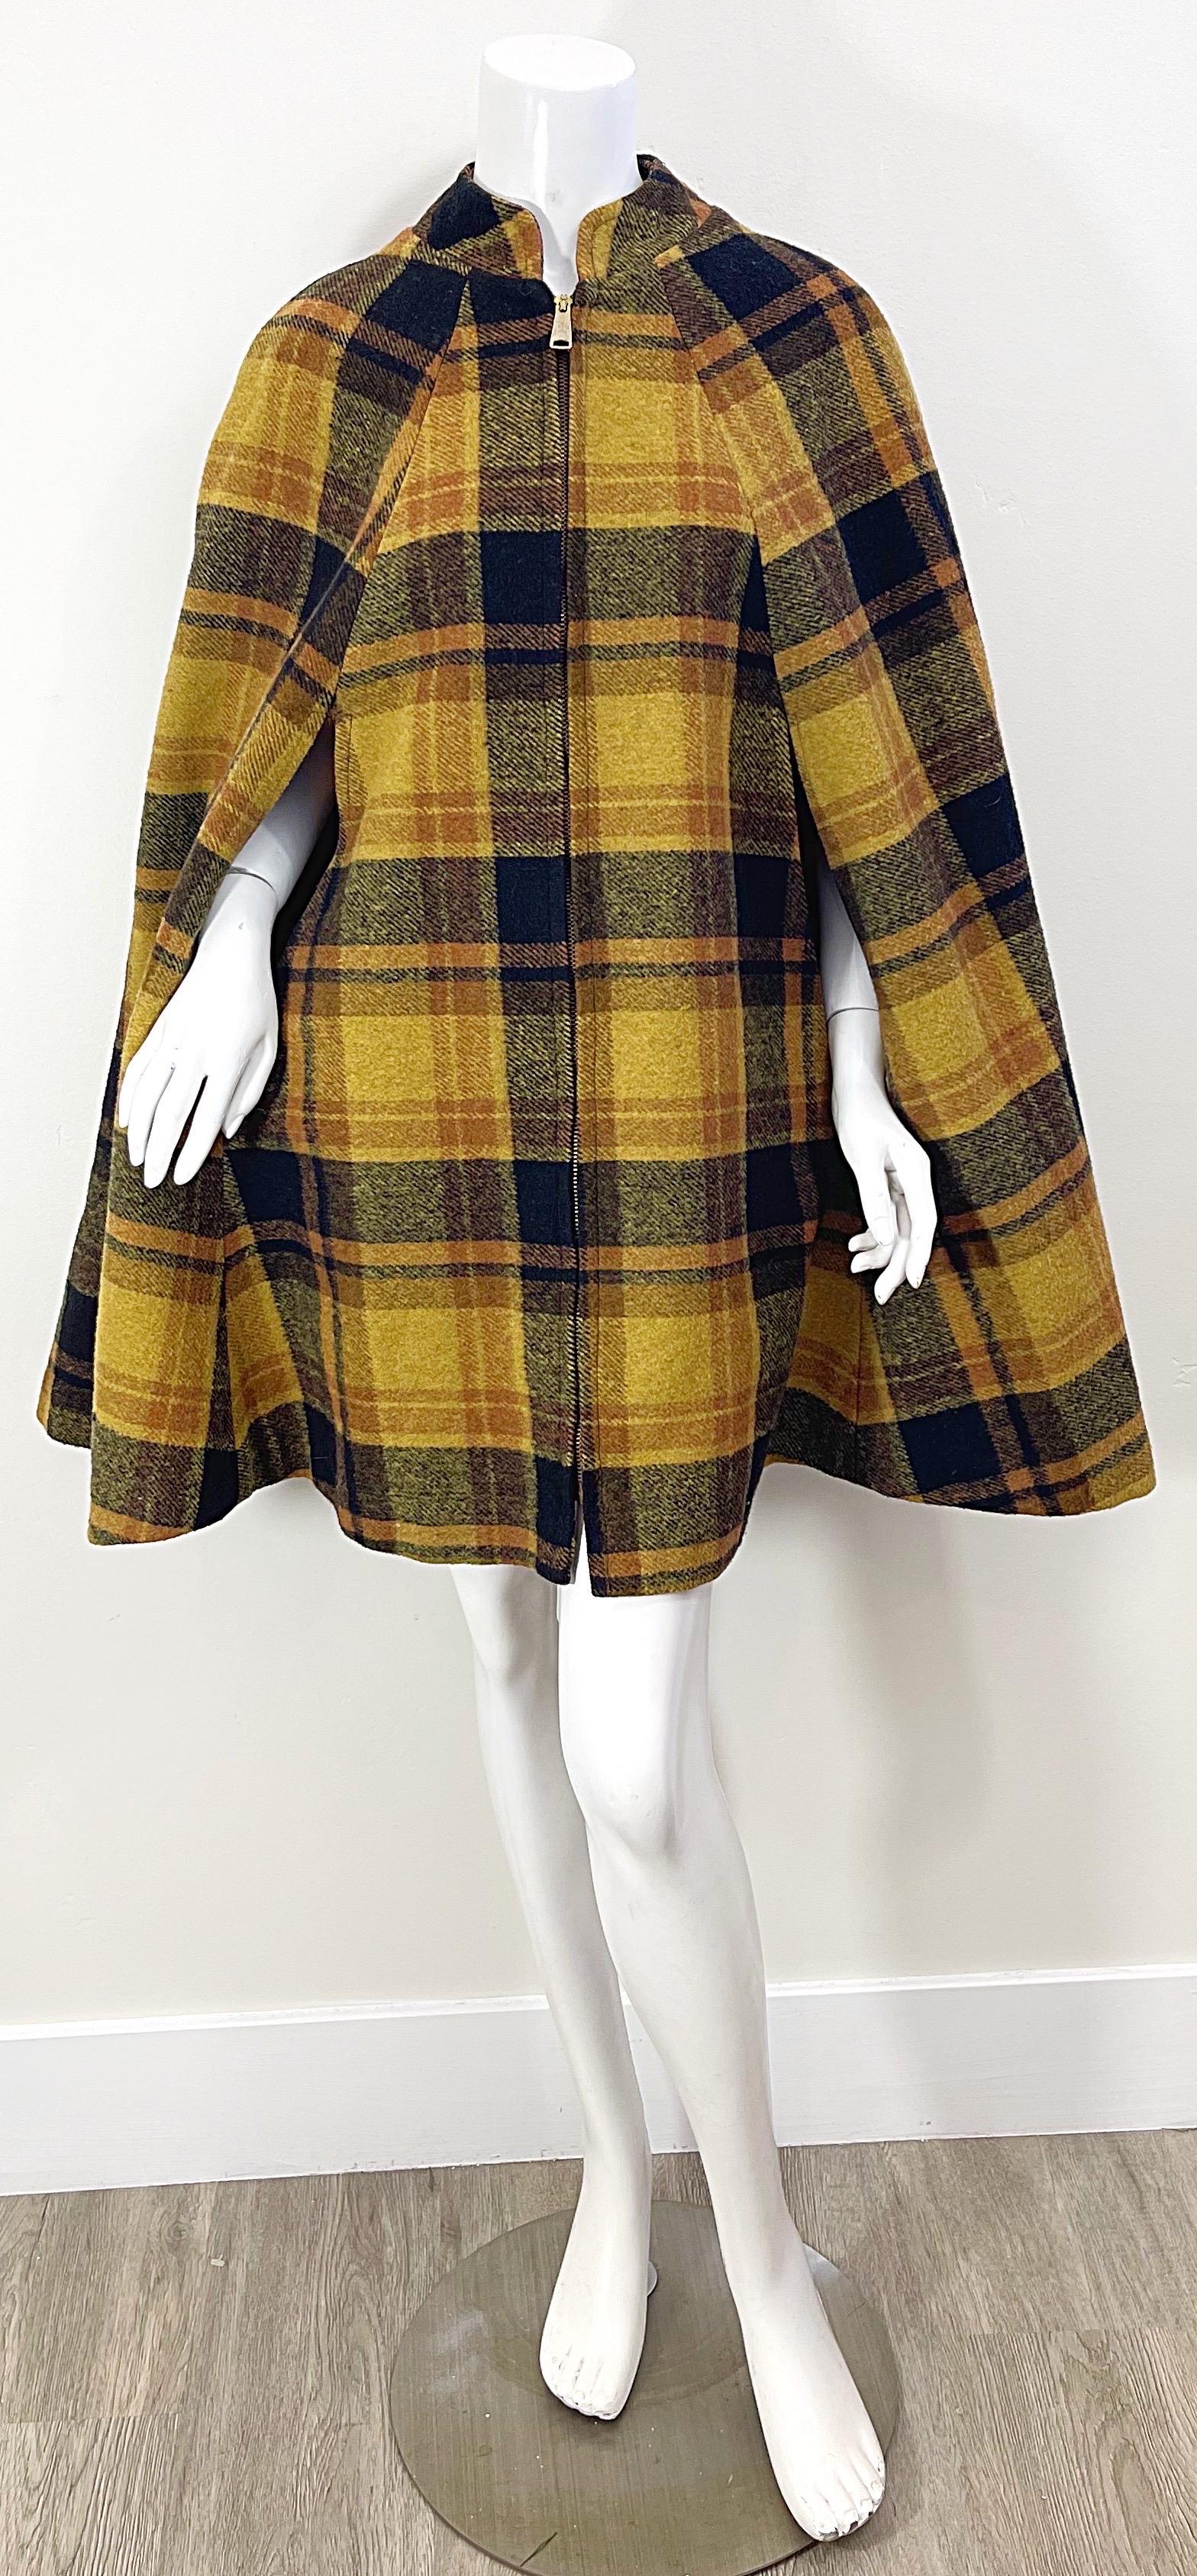 Chic mid 60s plaid wool cape ! Features warm hues of burnt orange, marigold yellow and black colors throughout. Full metal zipper up the front. Easy, timeless and effortless. In great condition
One Size Fits All 